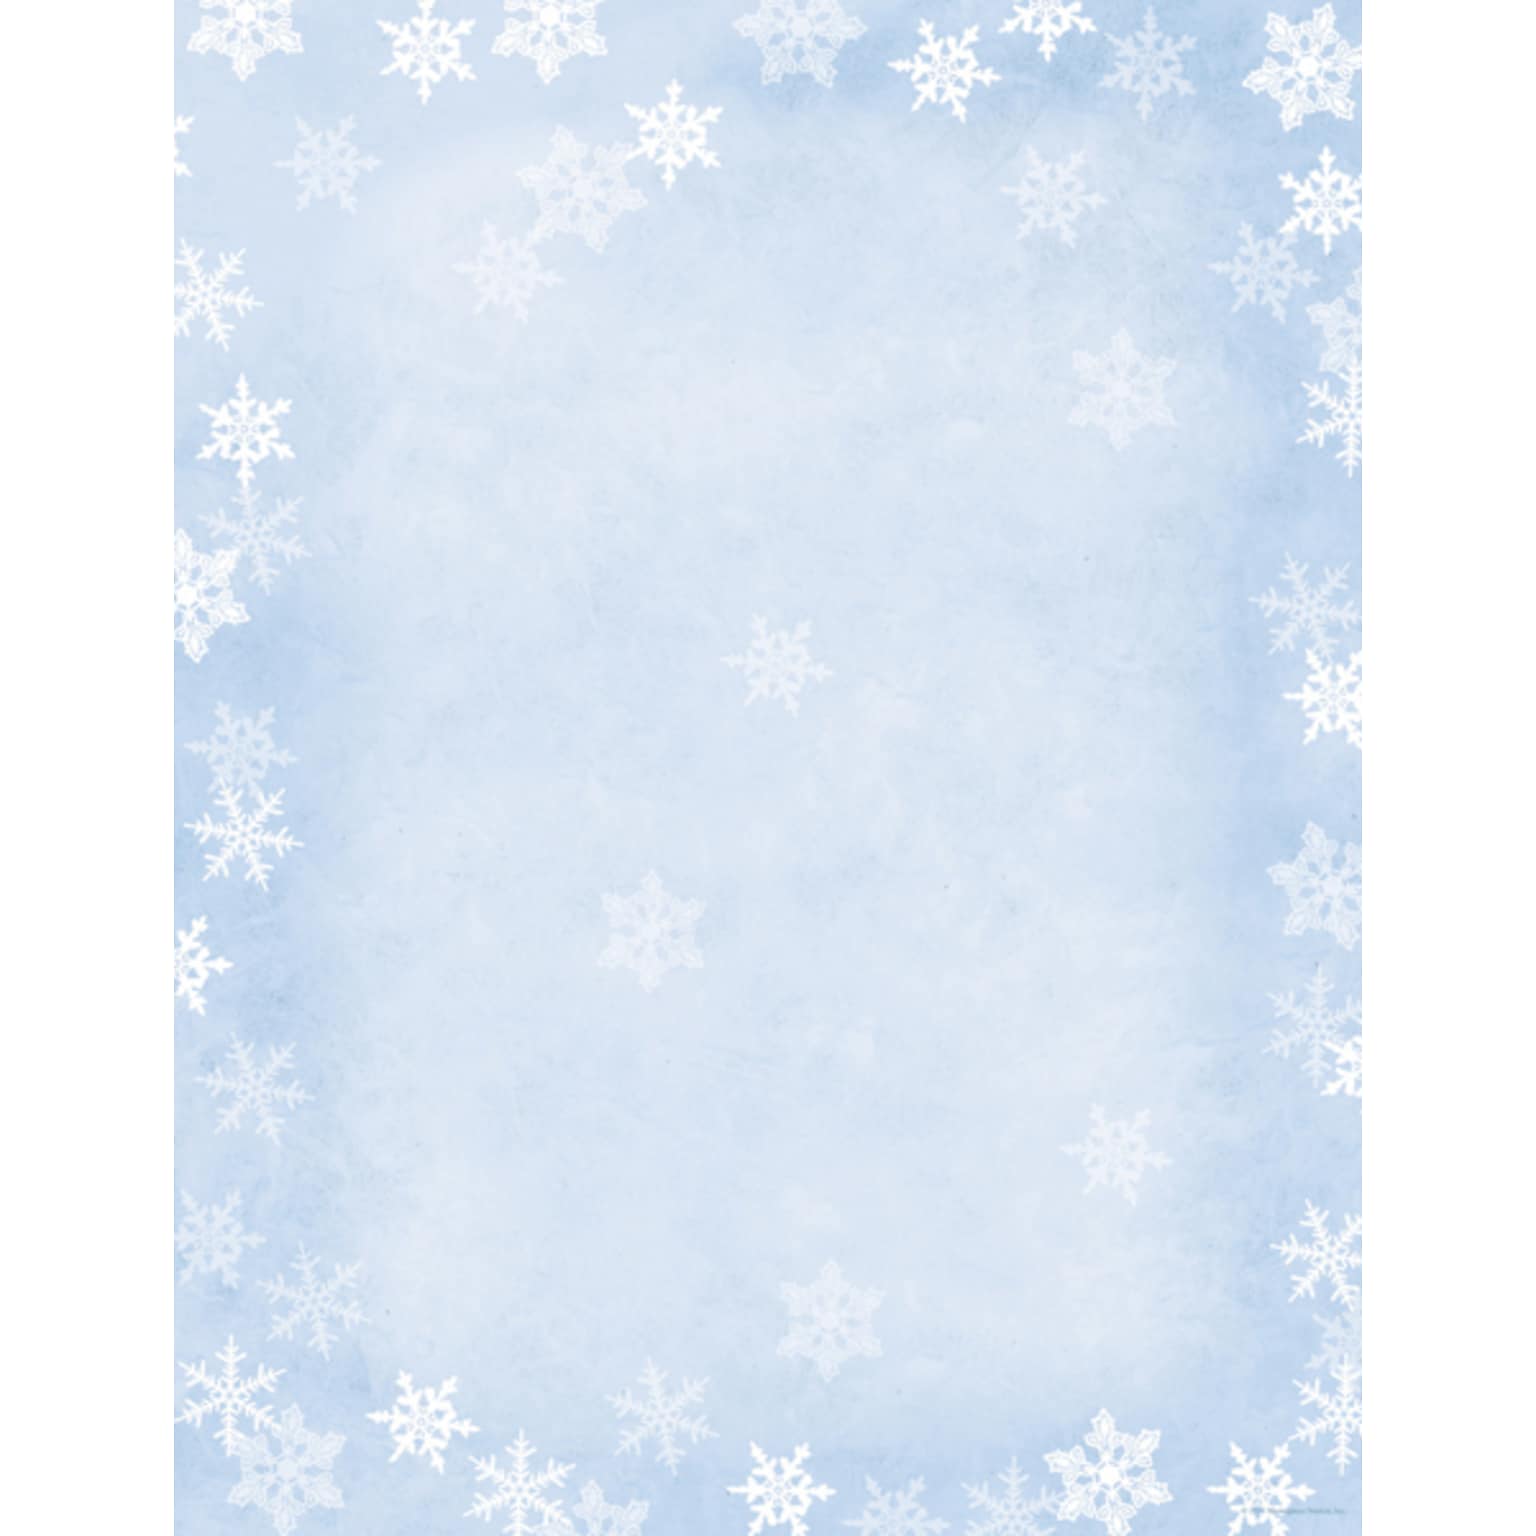 Great Papers Holiday Stationery Winter Flakes, 80/Count (2014080)